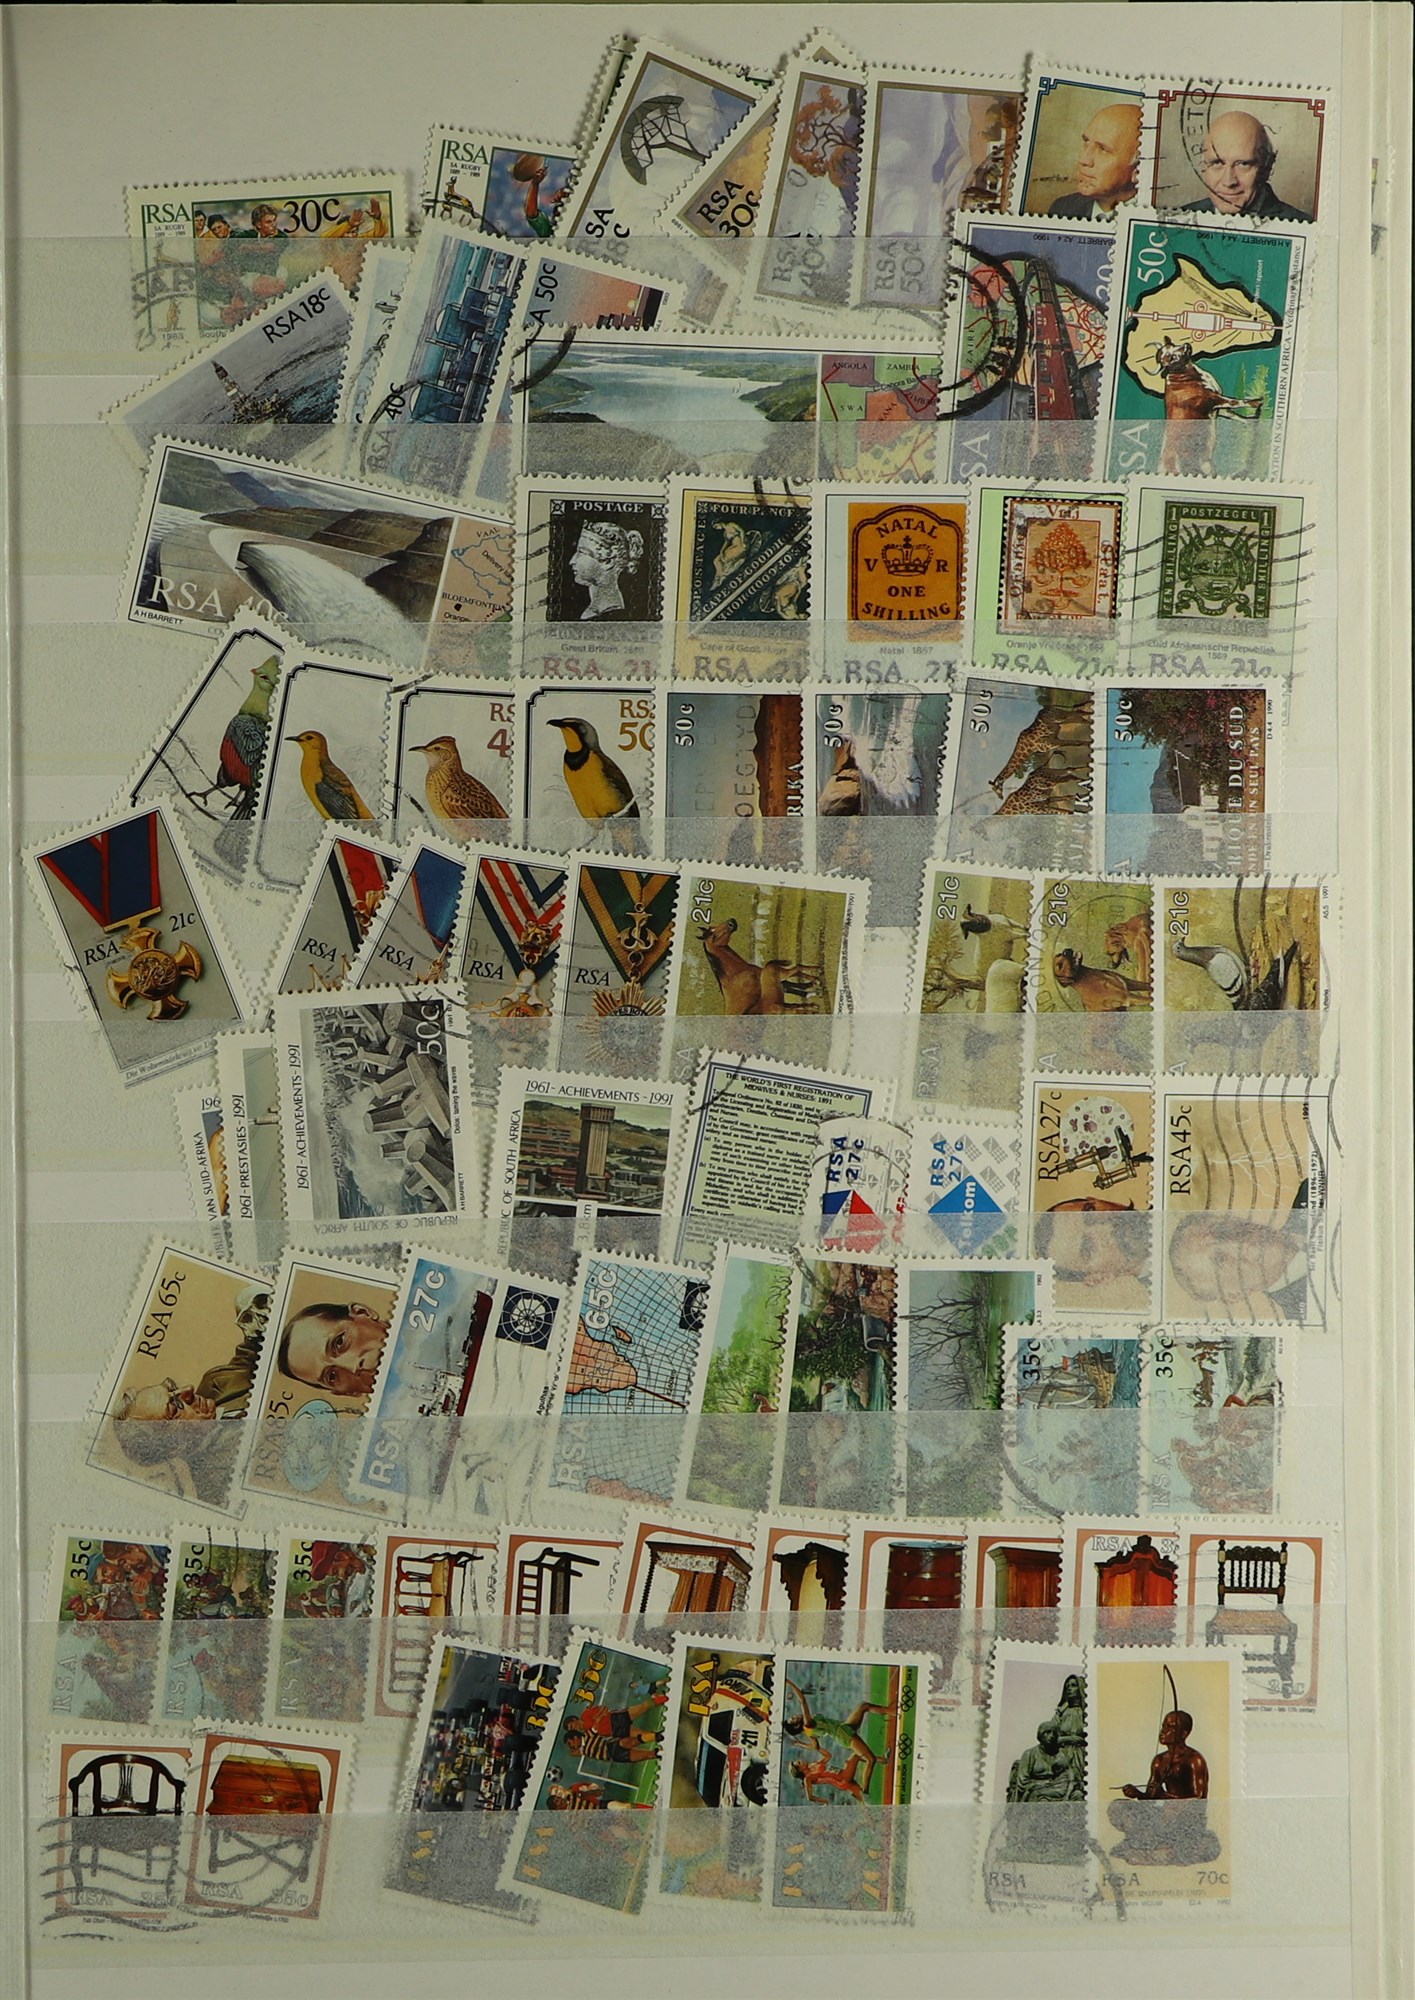 SOUTH AFRICA 1913 - 2000 COLLECTION / ACCUMULATION of 1500+ mint / never hinged mint & used stamps - Image 11 of 15